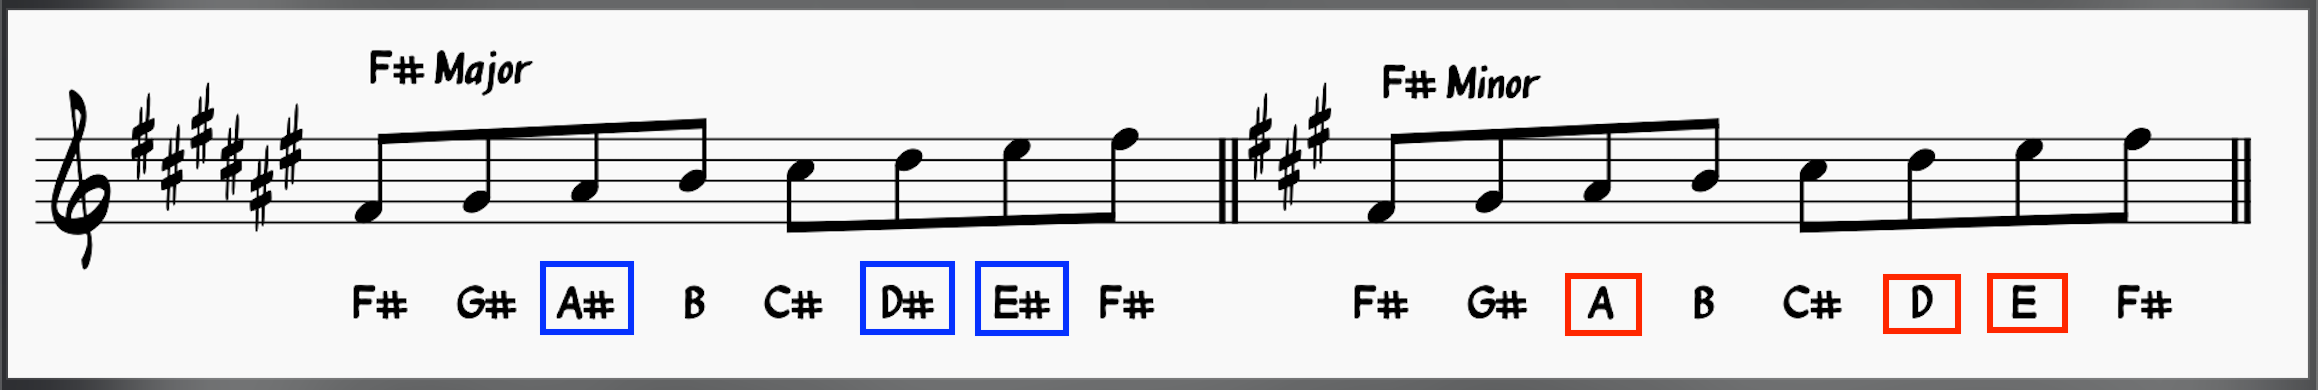 Parallel Key: F# Major Scale and F# Minor Scale 